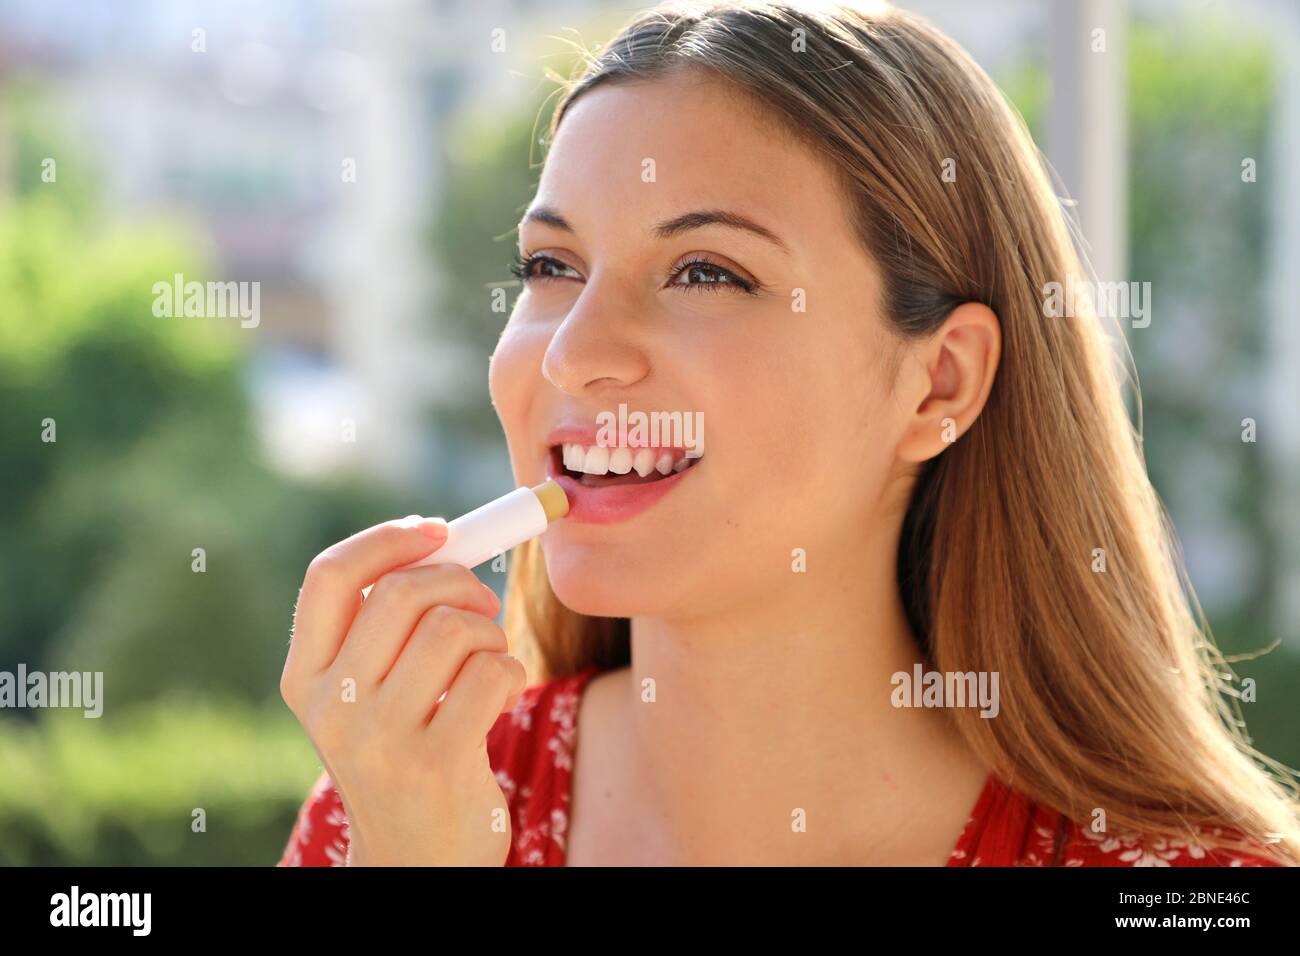 Smiling young woman applying sun protection on her lip outdoor Stock Photo